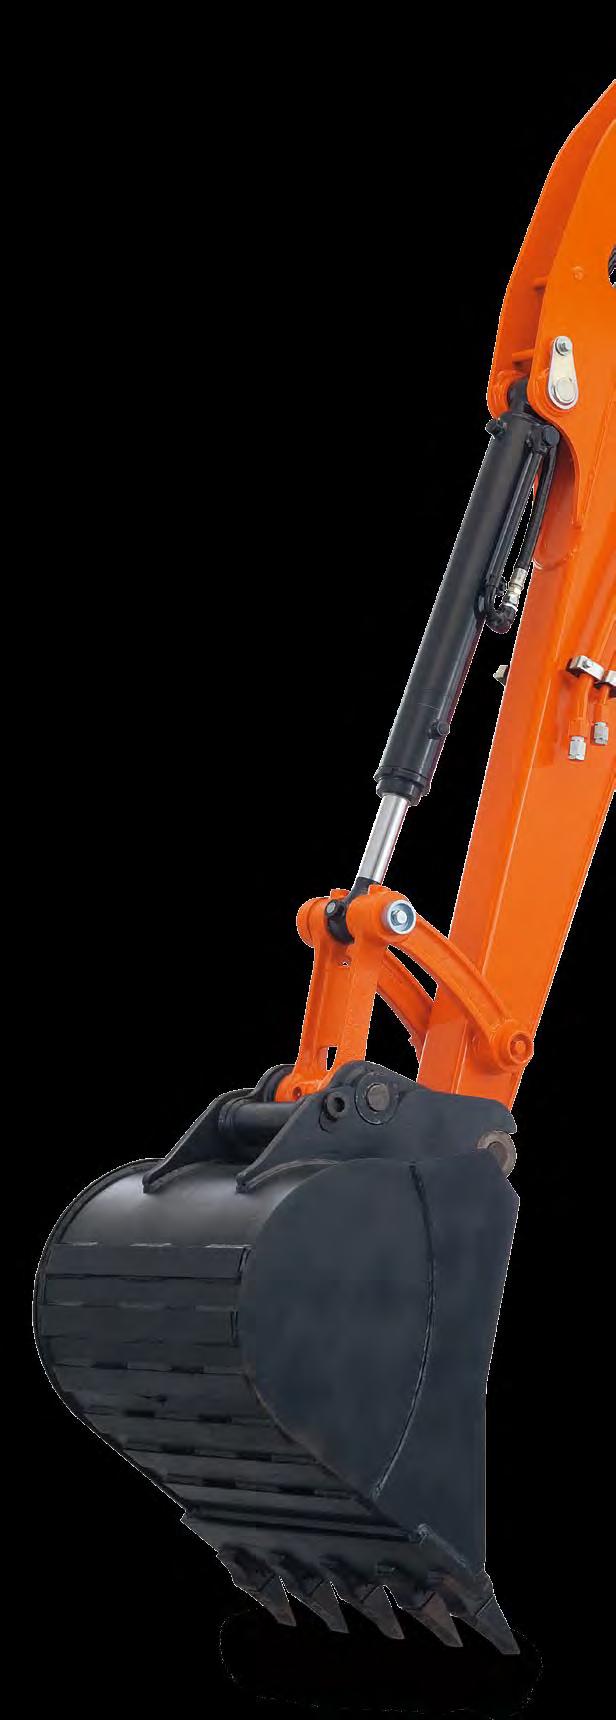 Set to redefine the entire 5-ton class, this Kubota compact excavator with a deluxe cab puts you in luxury and on top of almost any